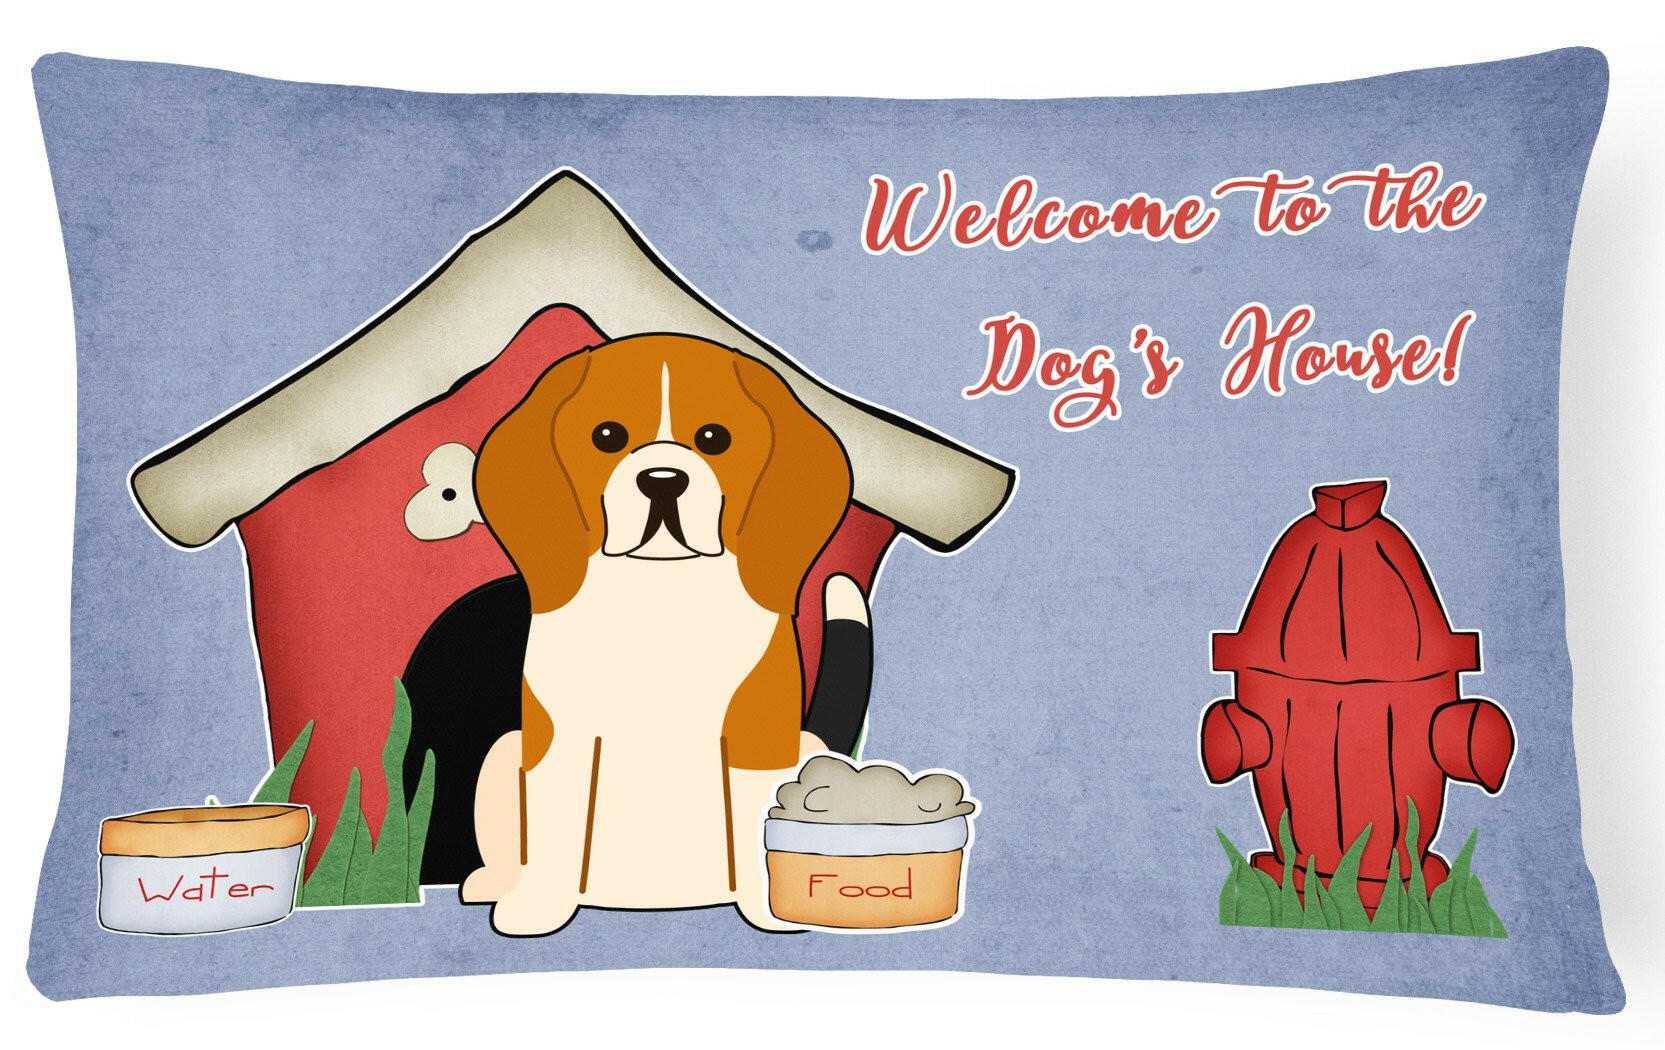 Dog House Collection Beagle Tricolor Canvas Fabric Decorative Pillow BB2794PW1216 by Caroline's Treasures